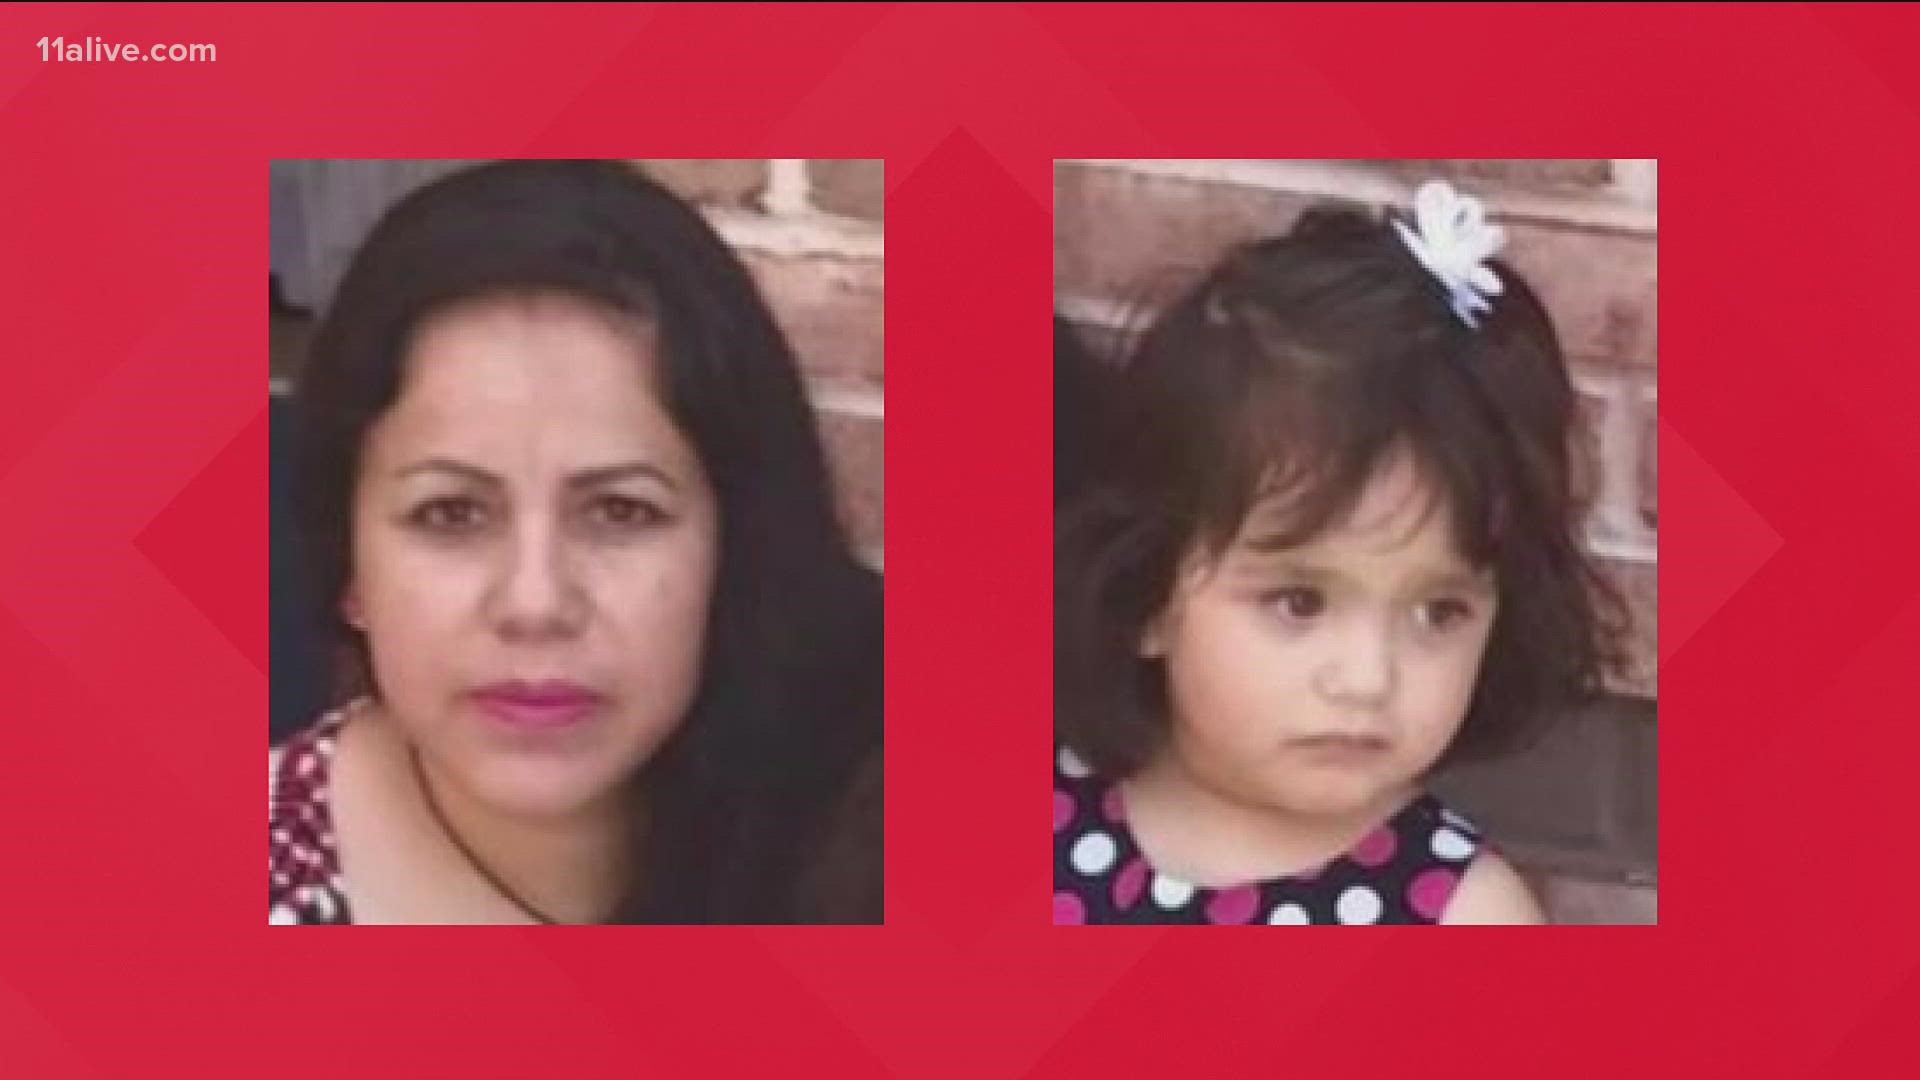 Officers said the father may have kidnapped the two and is considered to be armed and dangerous.